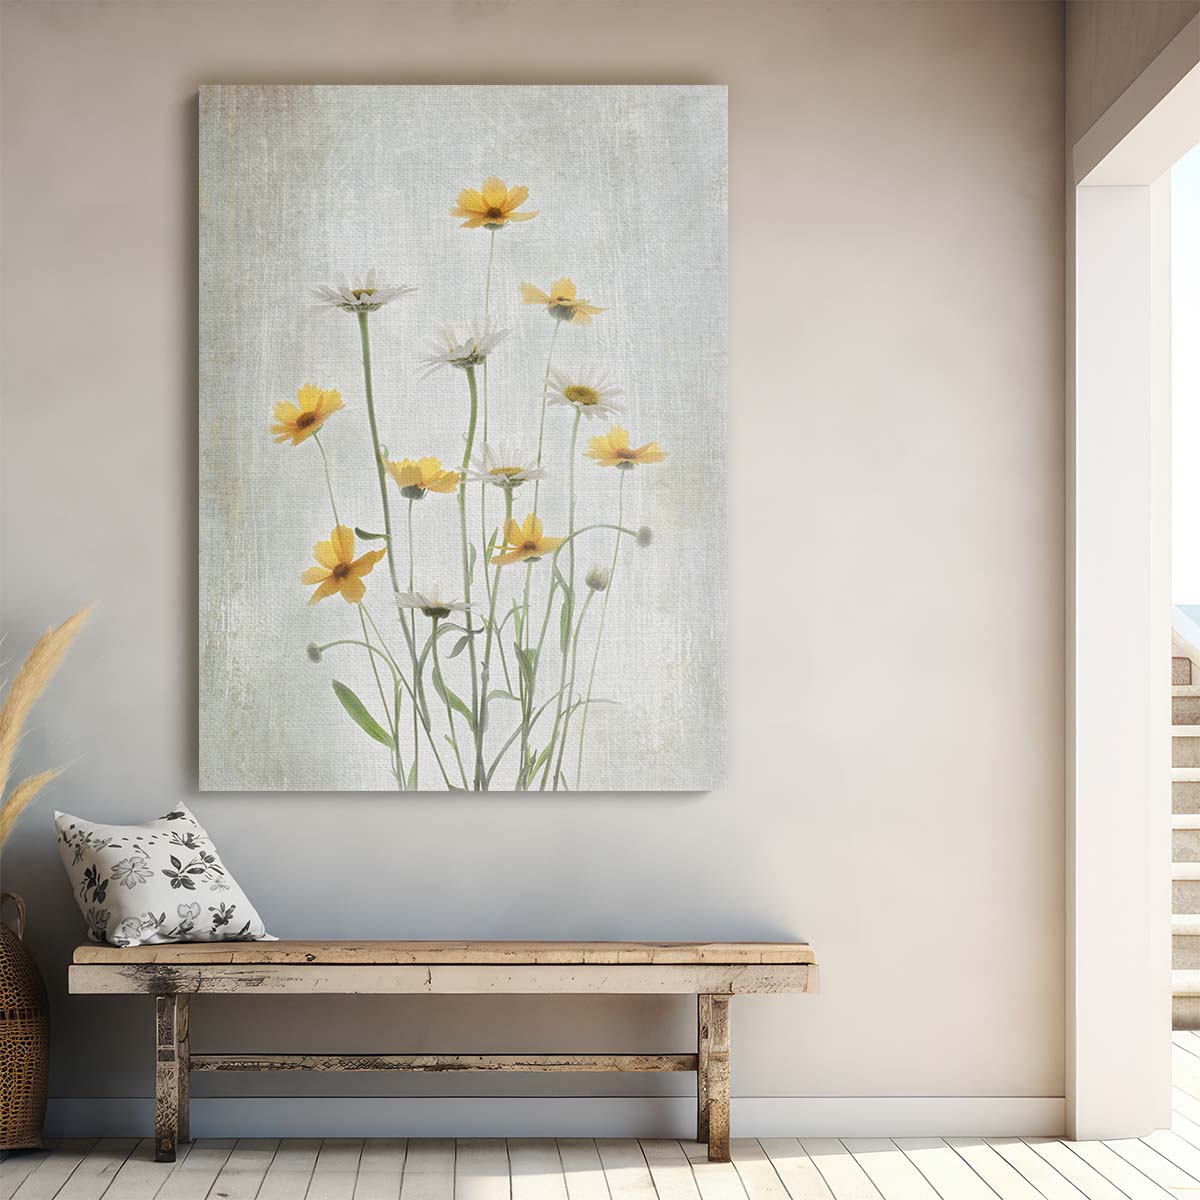 Summer Daisy Still Life Photography Floral and Botanical Wall Art by Luxuriance Designs, made in USA